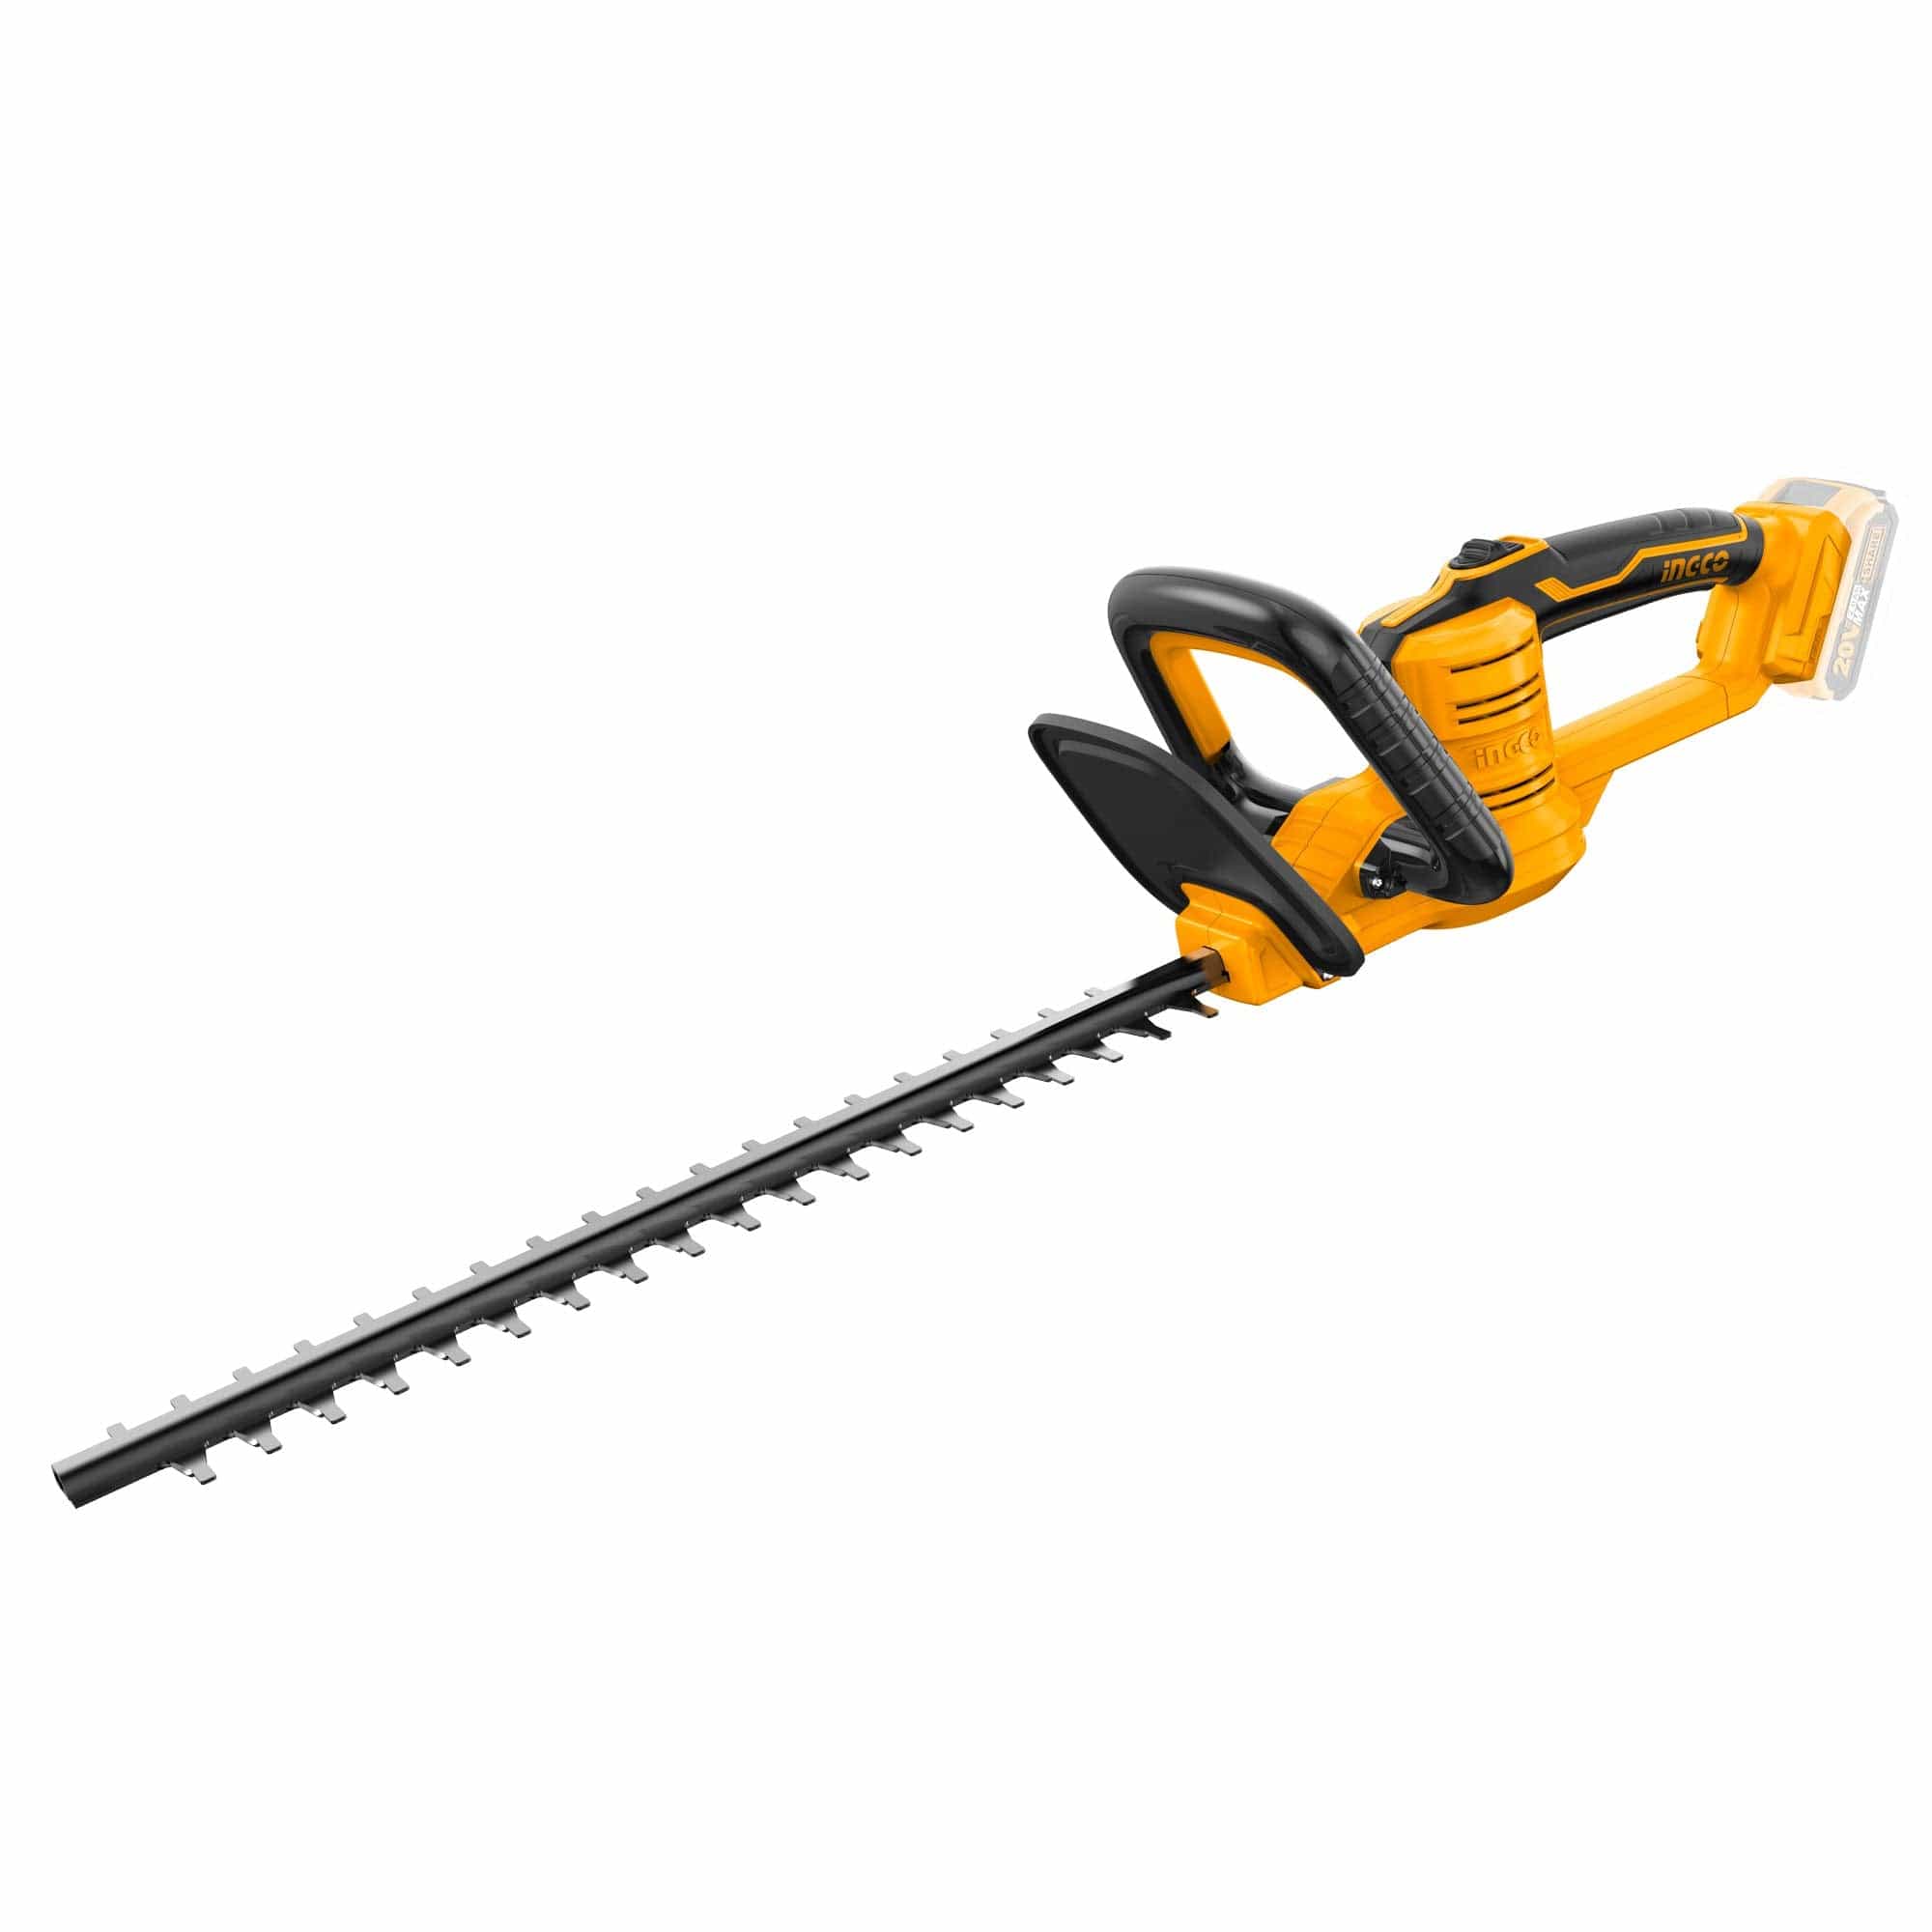 Ingco Lithium-Ion Cordless Hedge Trimmer - CHTLI20018 | Buy Online in Accra, Ghana - Supply Master Trimmer Buy Tools hardware Building materials